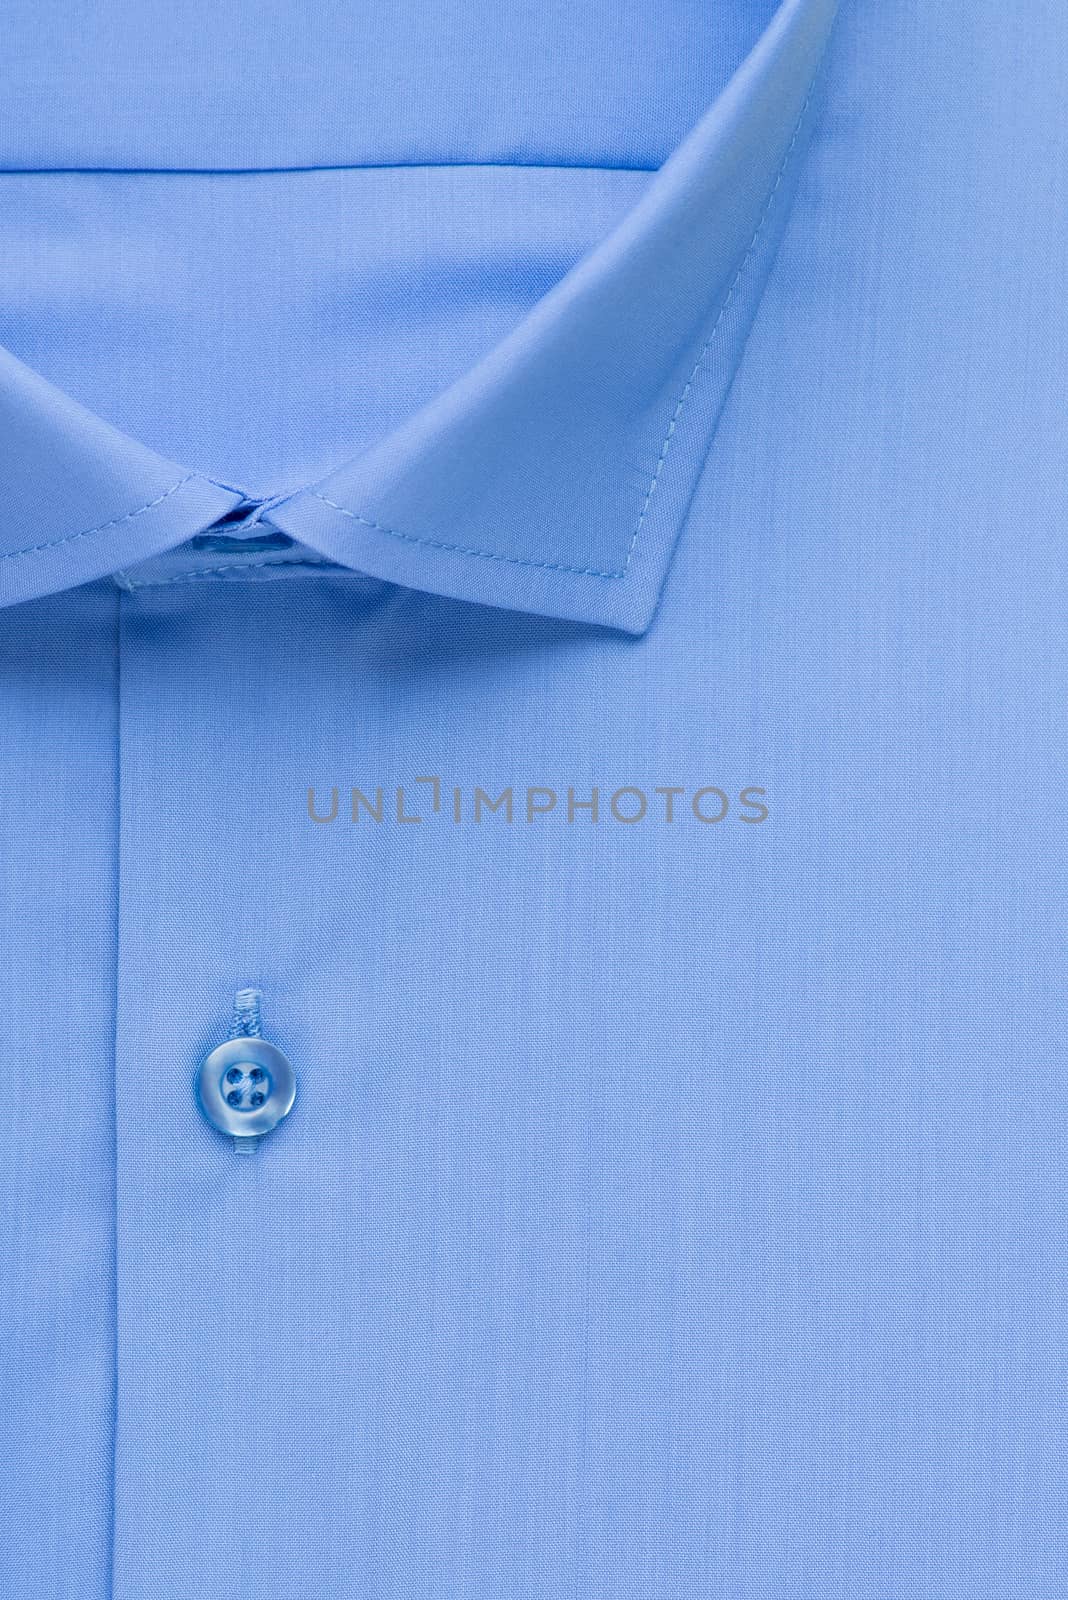 shirt, detailed close-up collar and button, top view